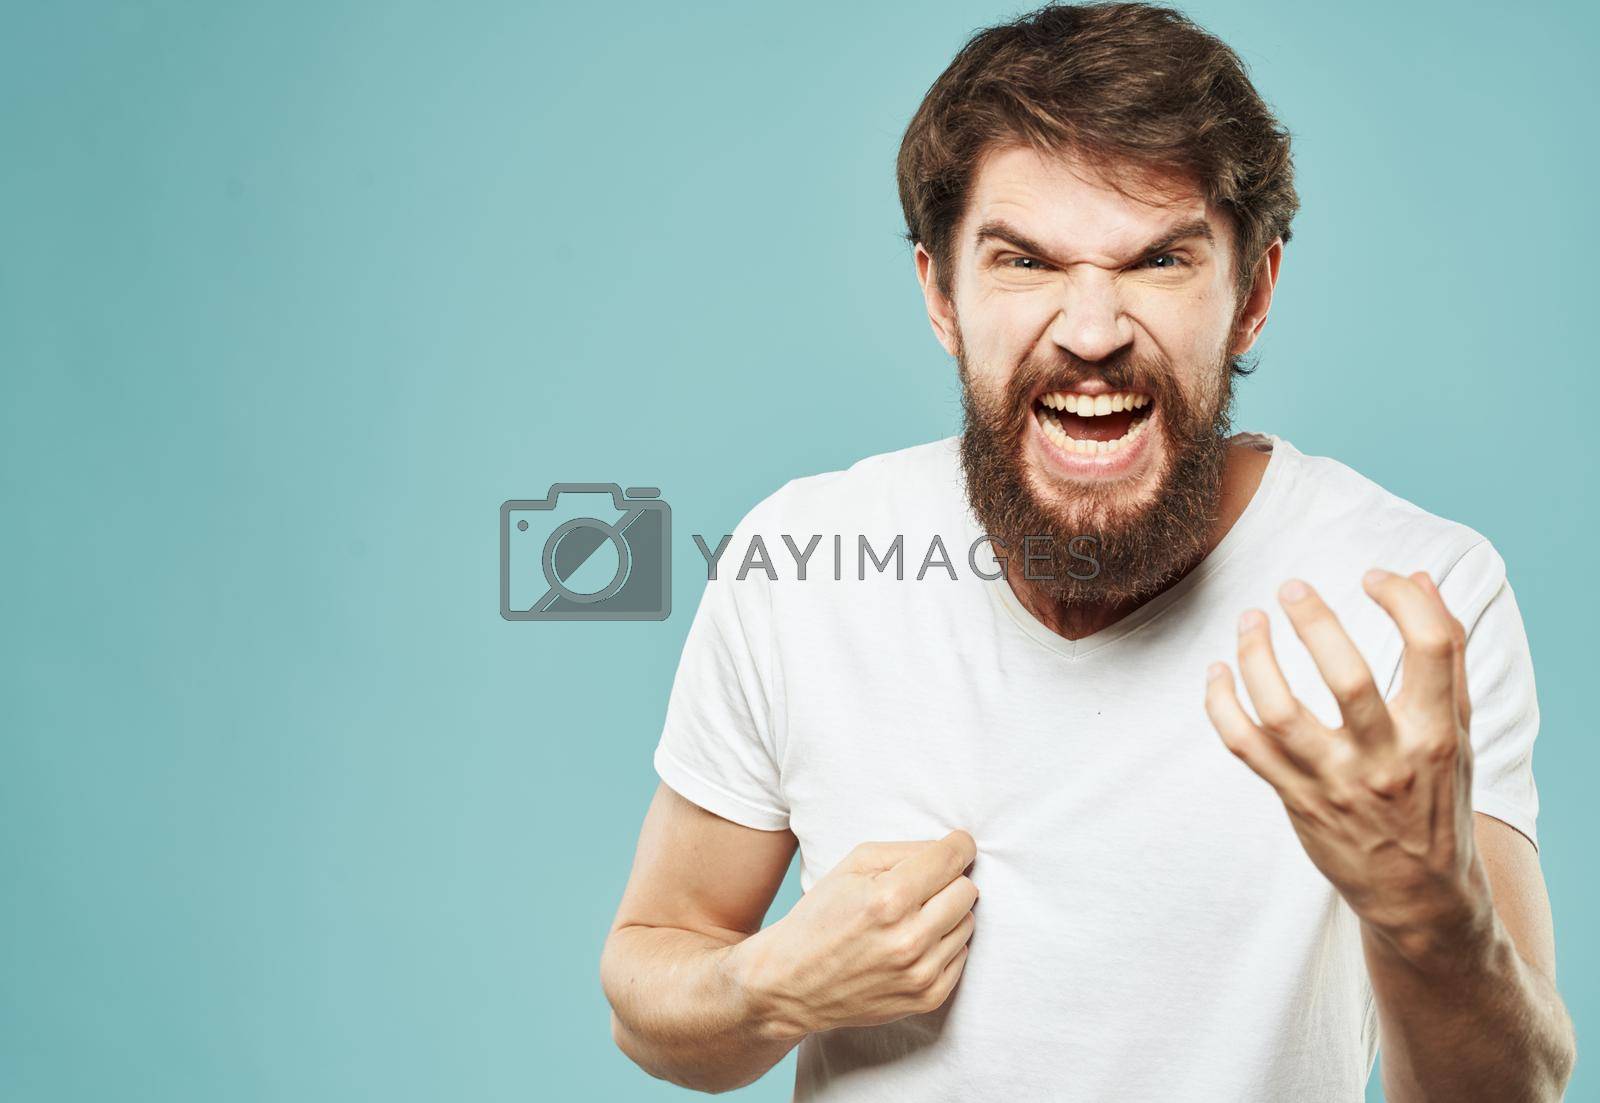 Royalty free image of Aggressive man emotions and stress irritability blue background by SHOTPRIME